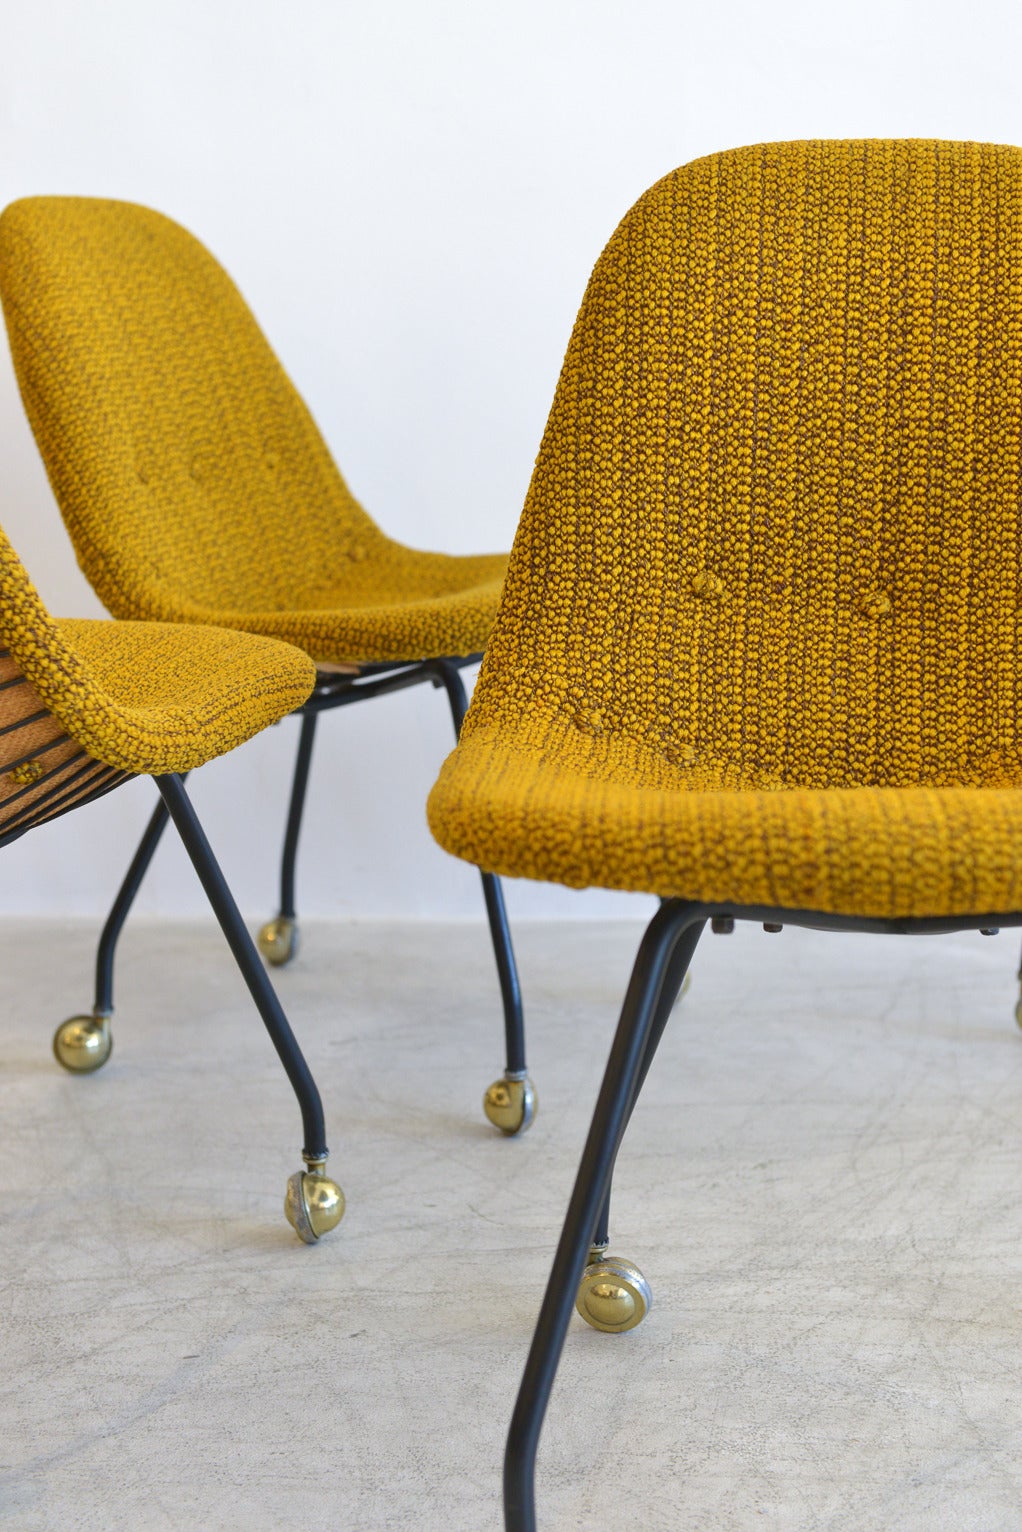 Very early and rare set of four wire mesh chairs by Charles Eames for Herman Miller. All chairs still have the original early Venice CA tags as well as the original form fitted seat covers with vintage Alexander Girard fabric in excellent vintage